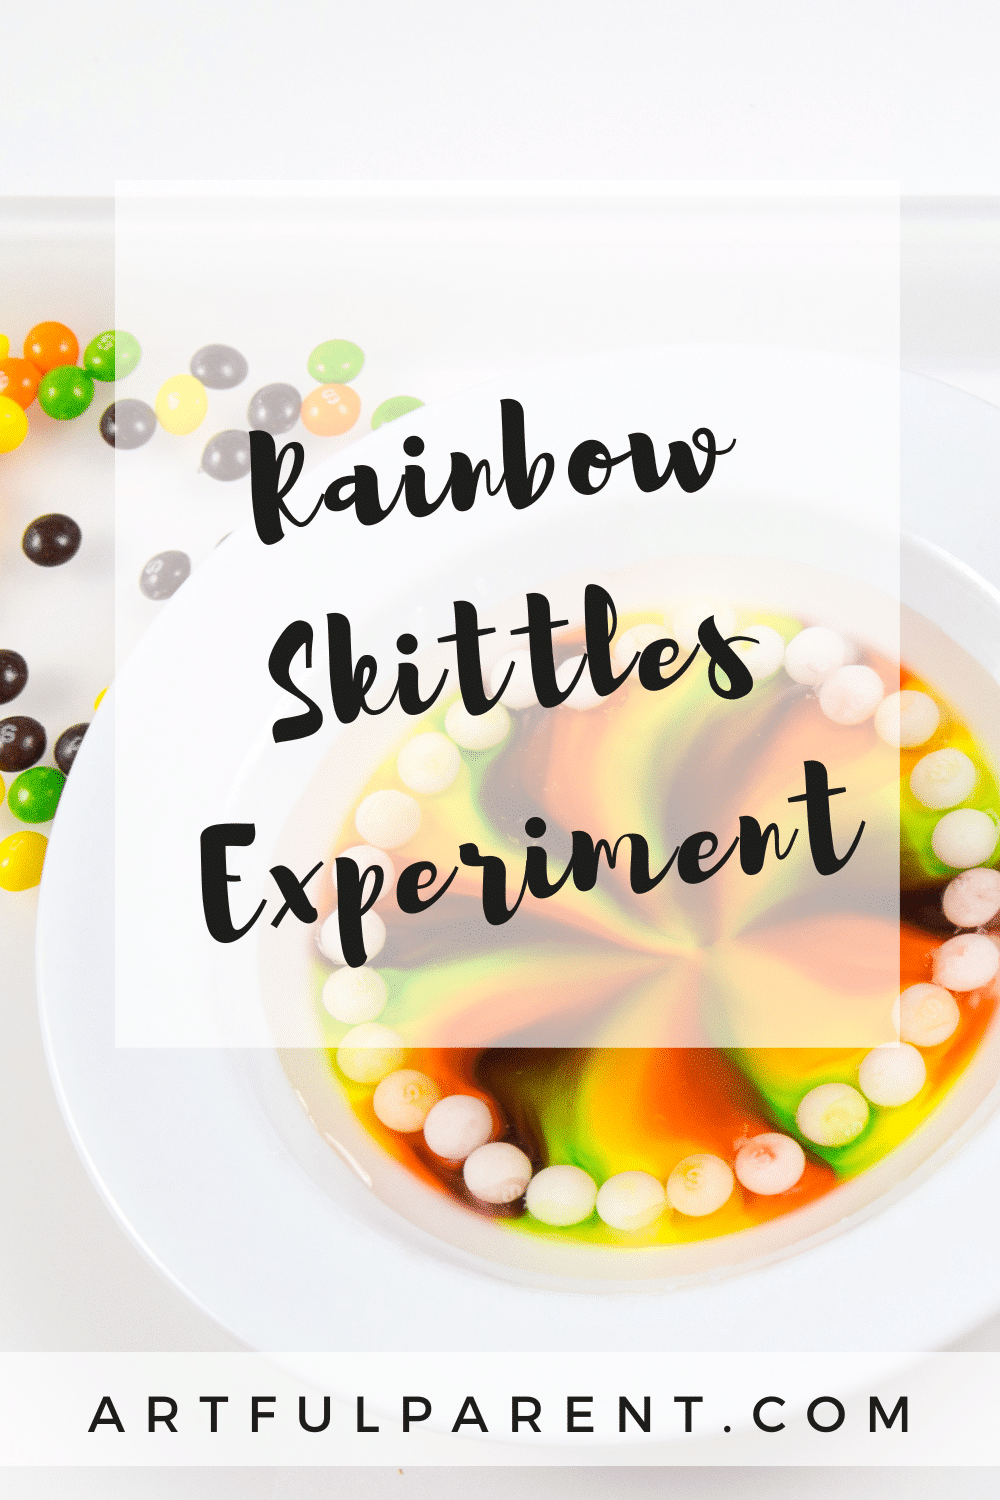 How to Do the Rainbow Skittles Experiment